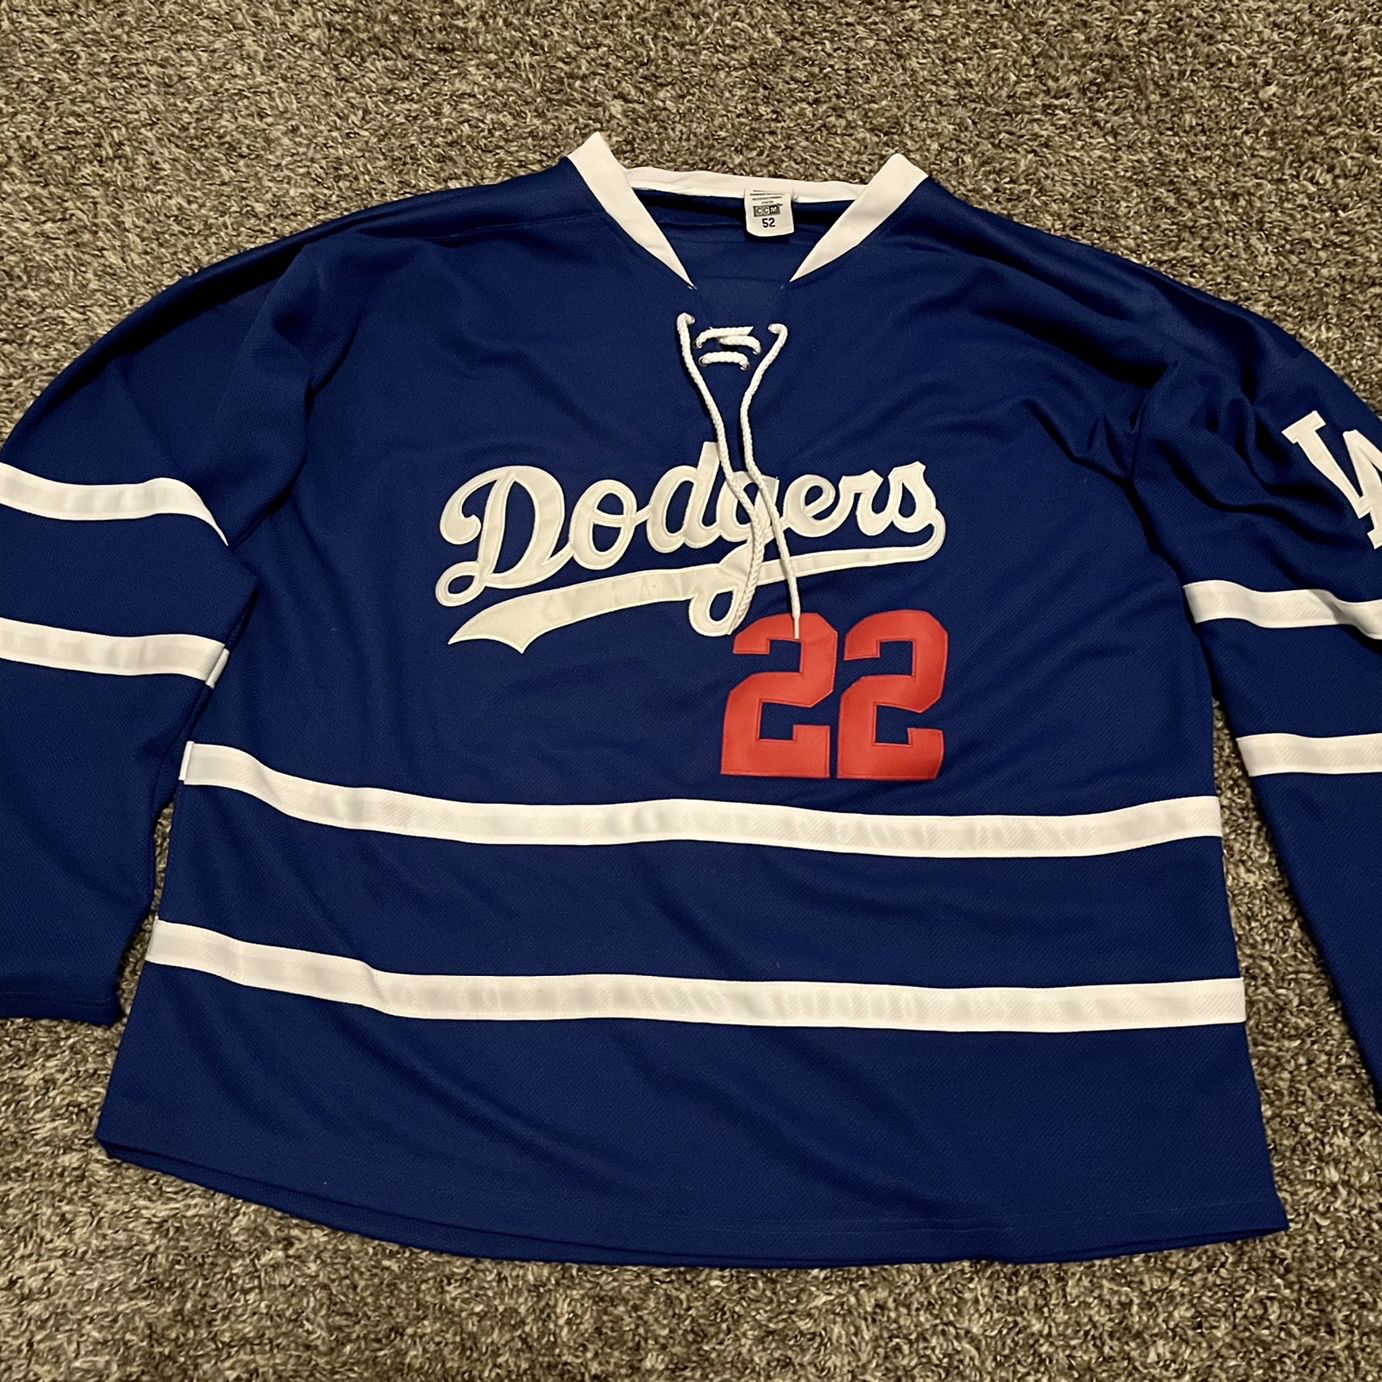 Dodgers Clayton Kershaw Jersey for Sale in Cypress, CA - OfferUp